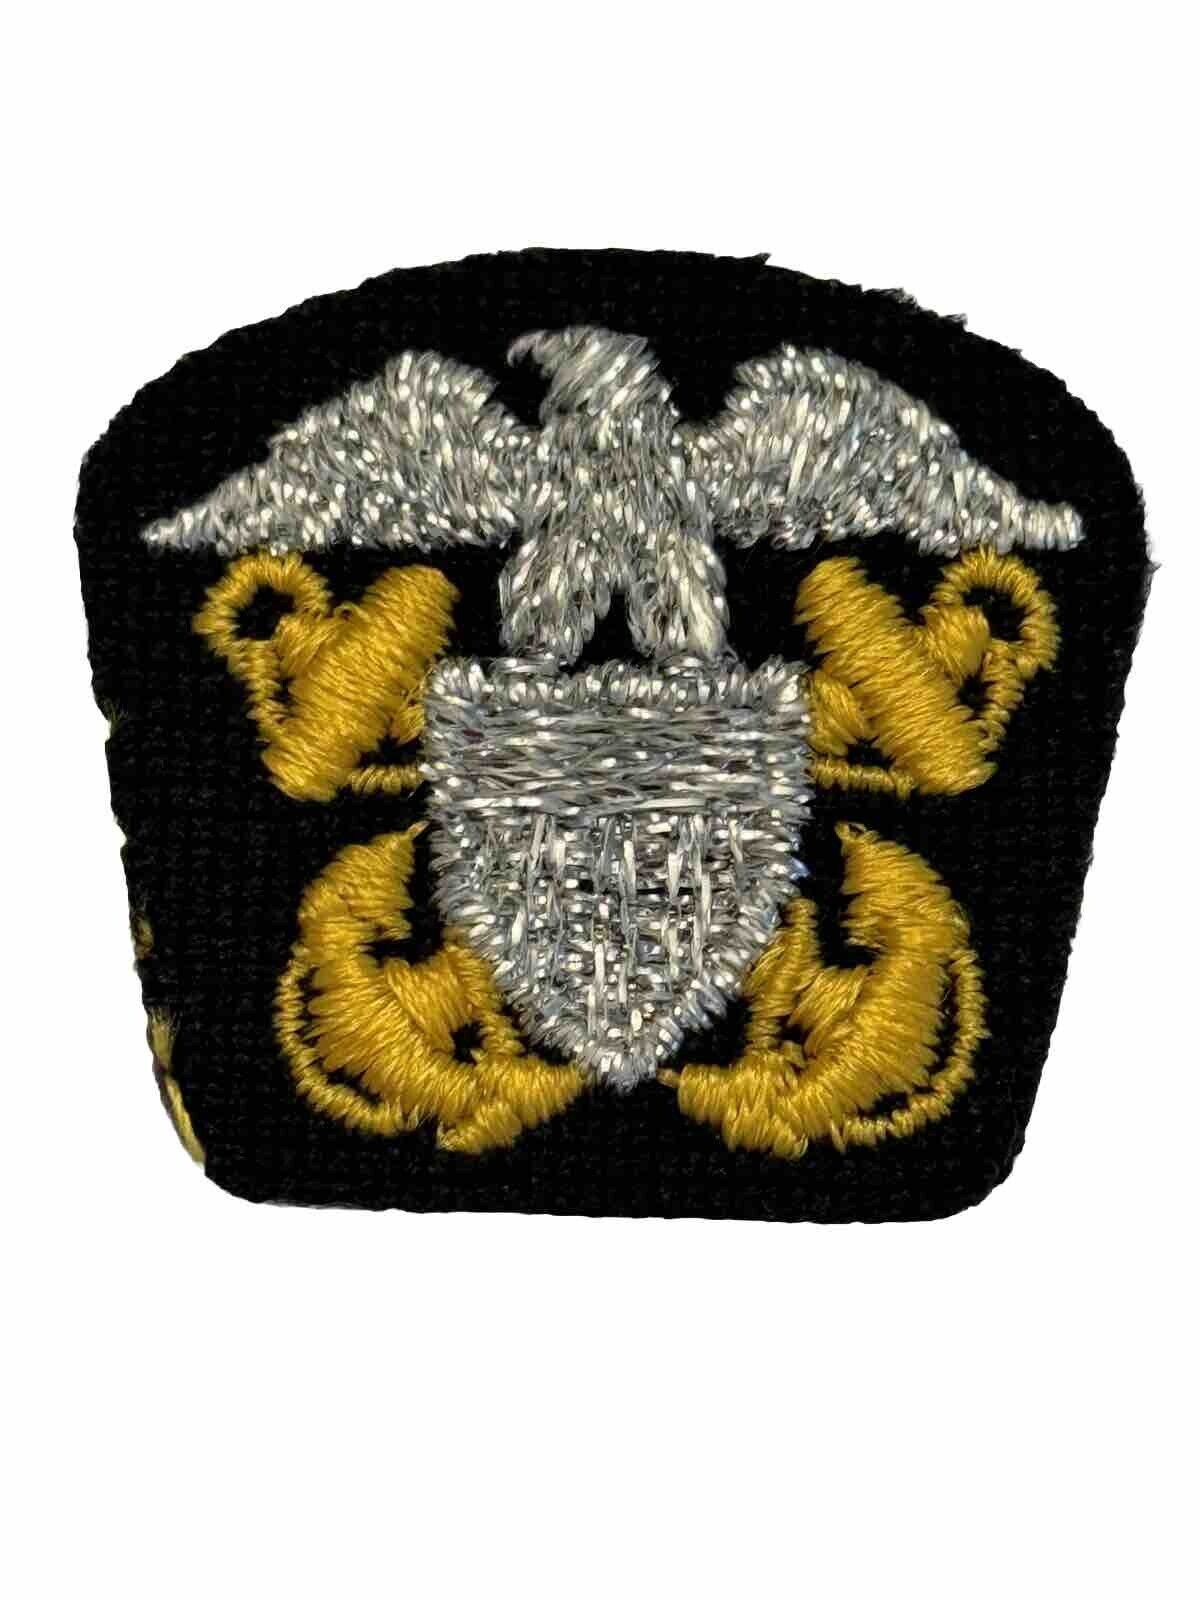 US Navy Cap Patch Chief Warrant Officer Embroidered Military Badge